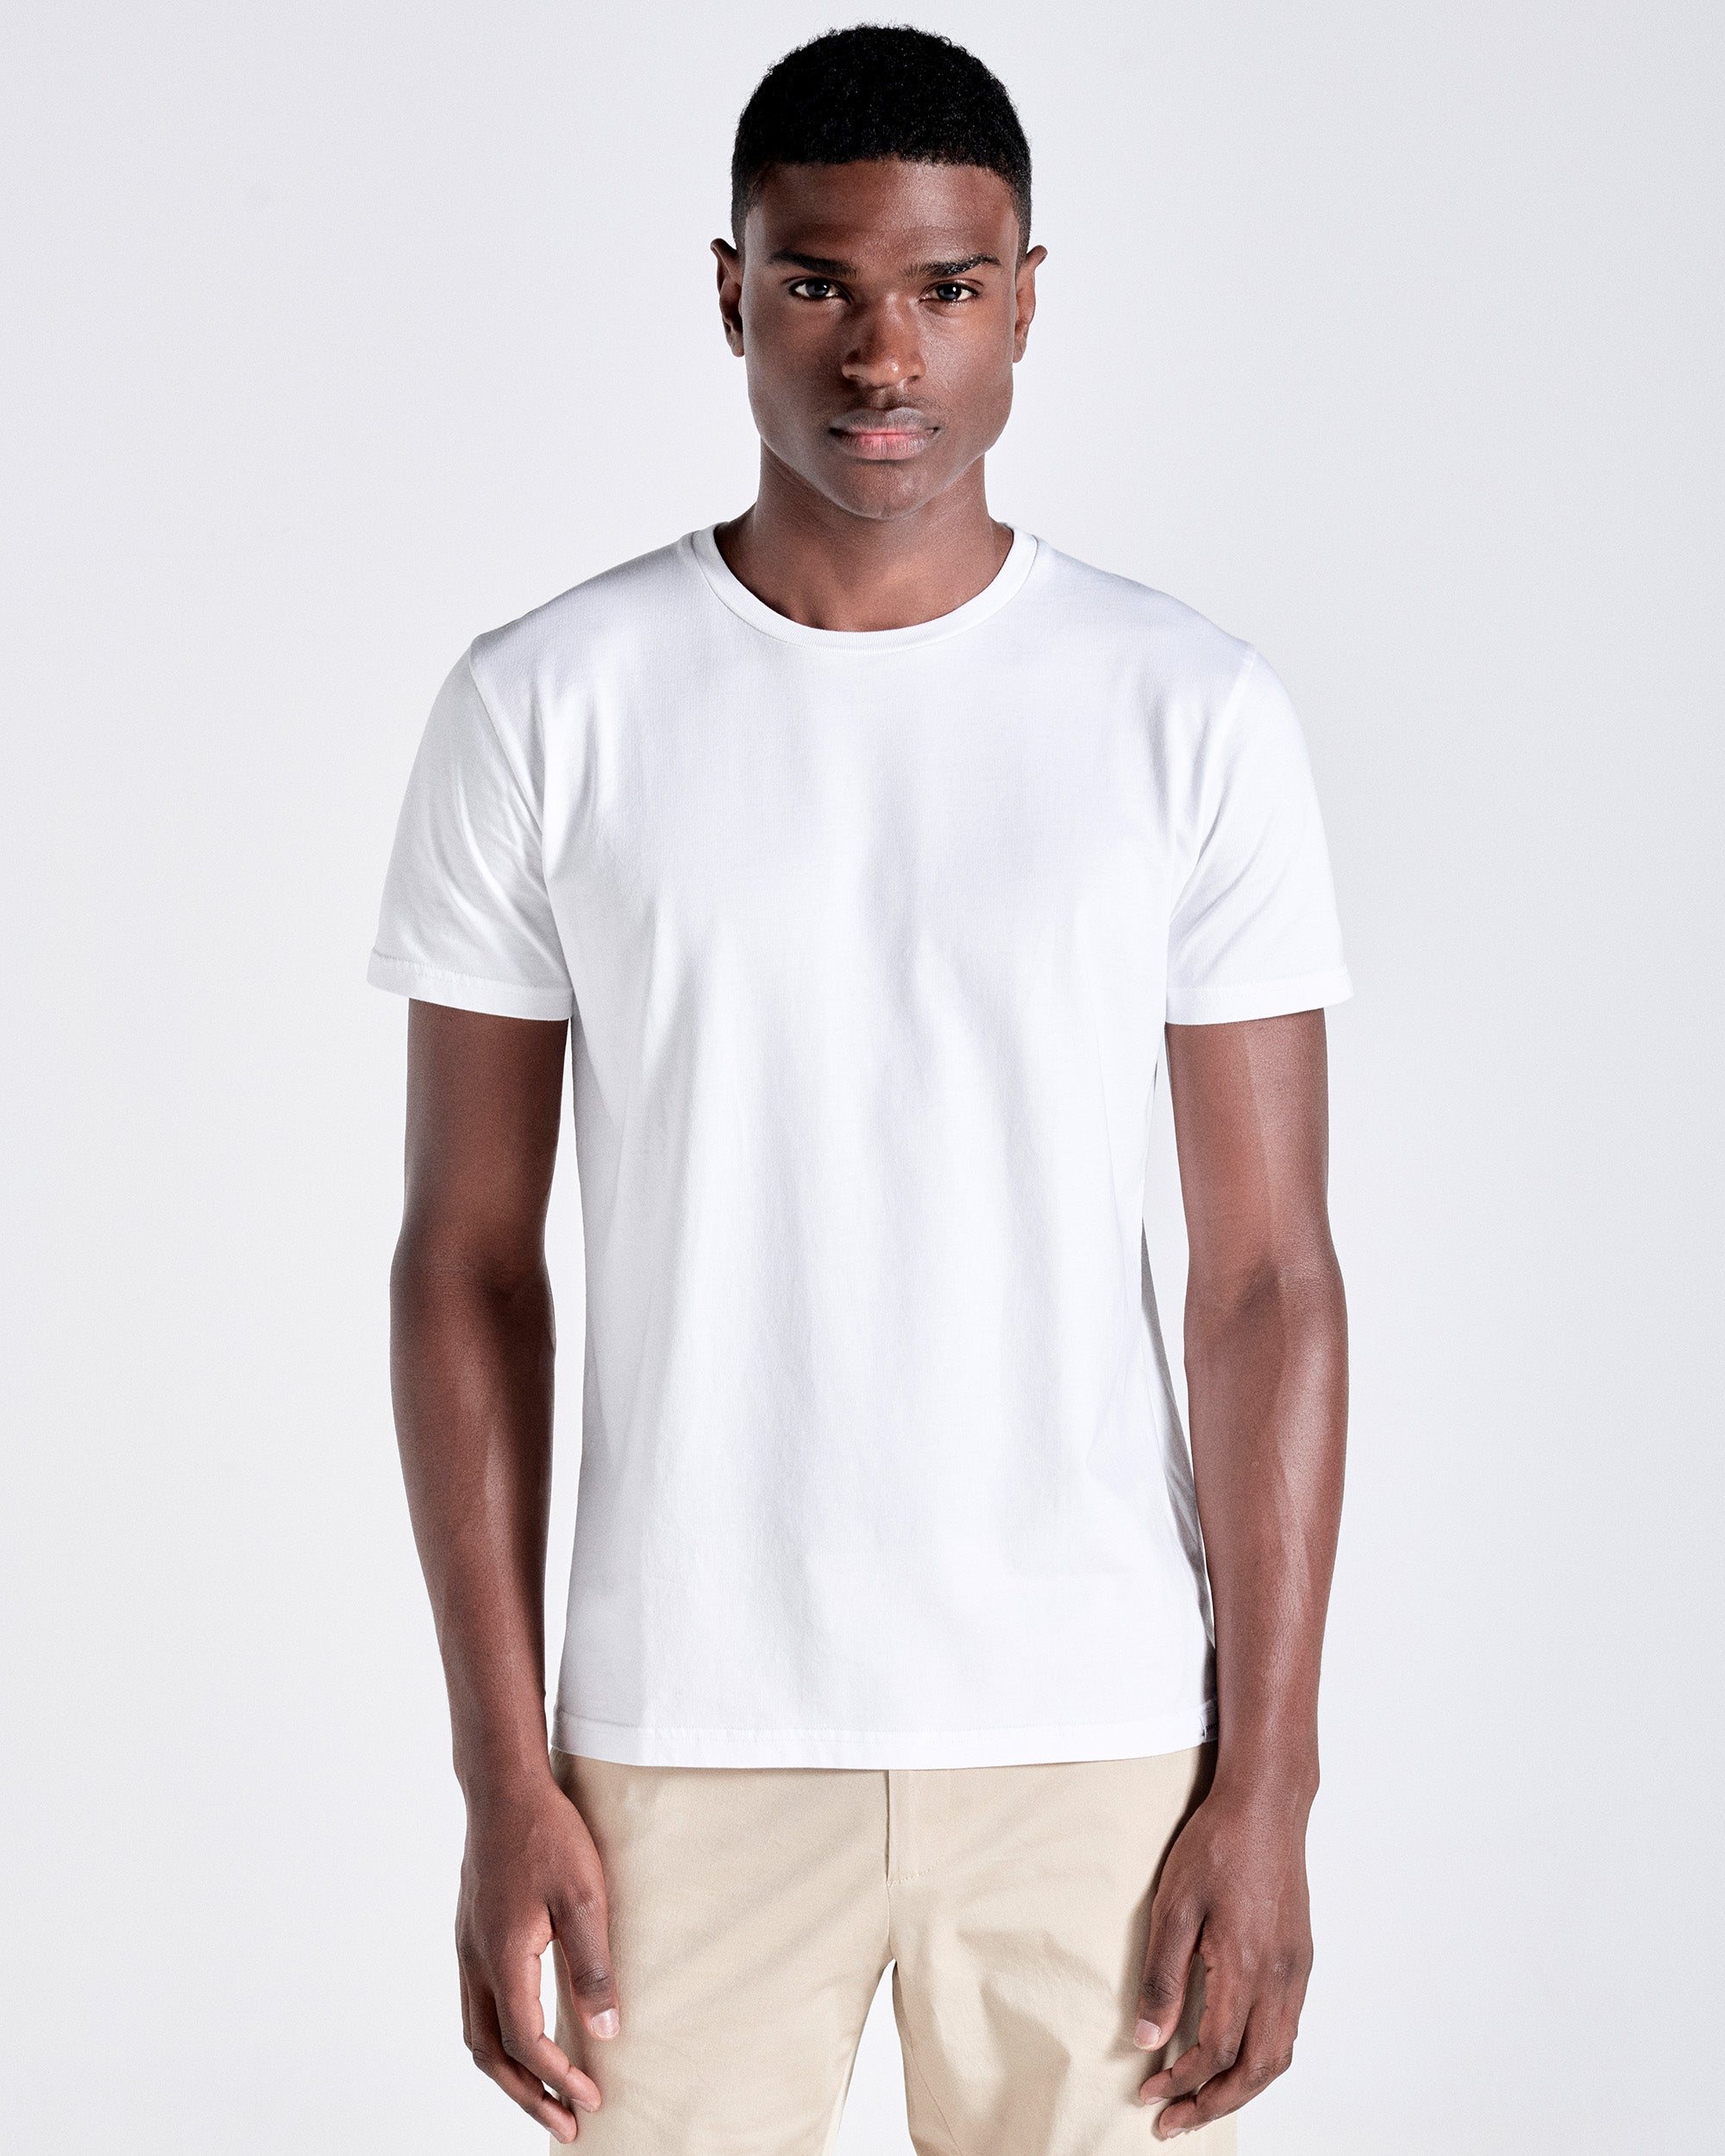 The Perfect White T-Shirt for Men